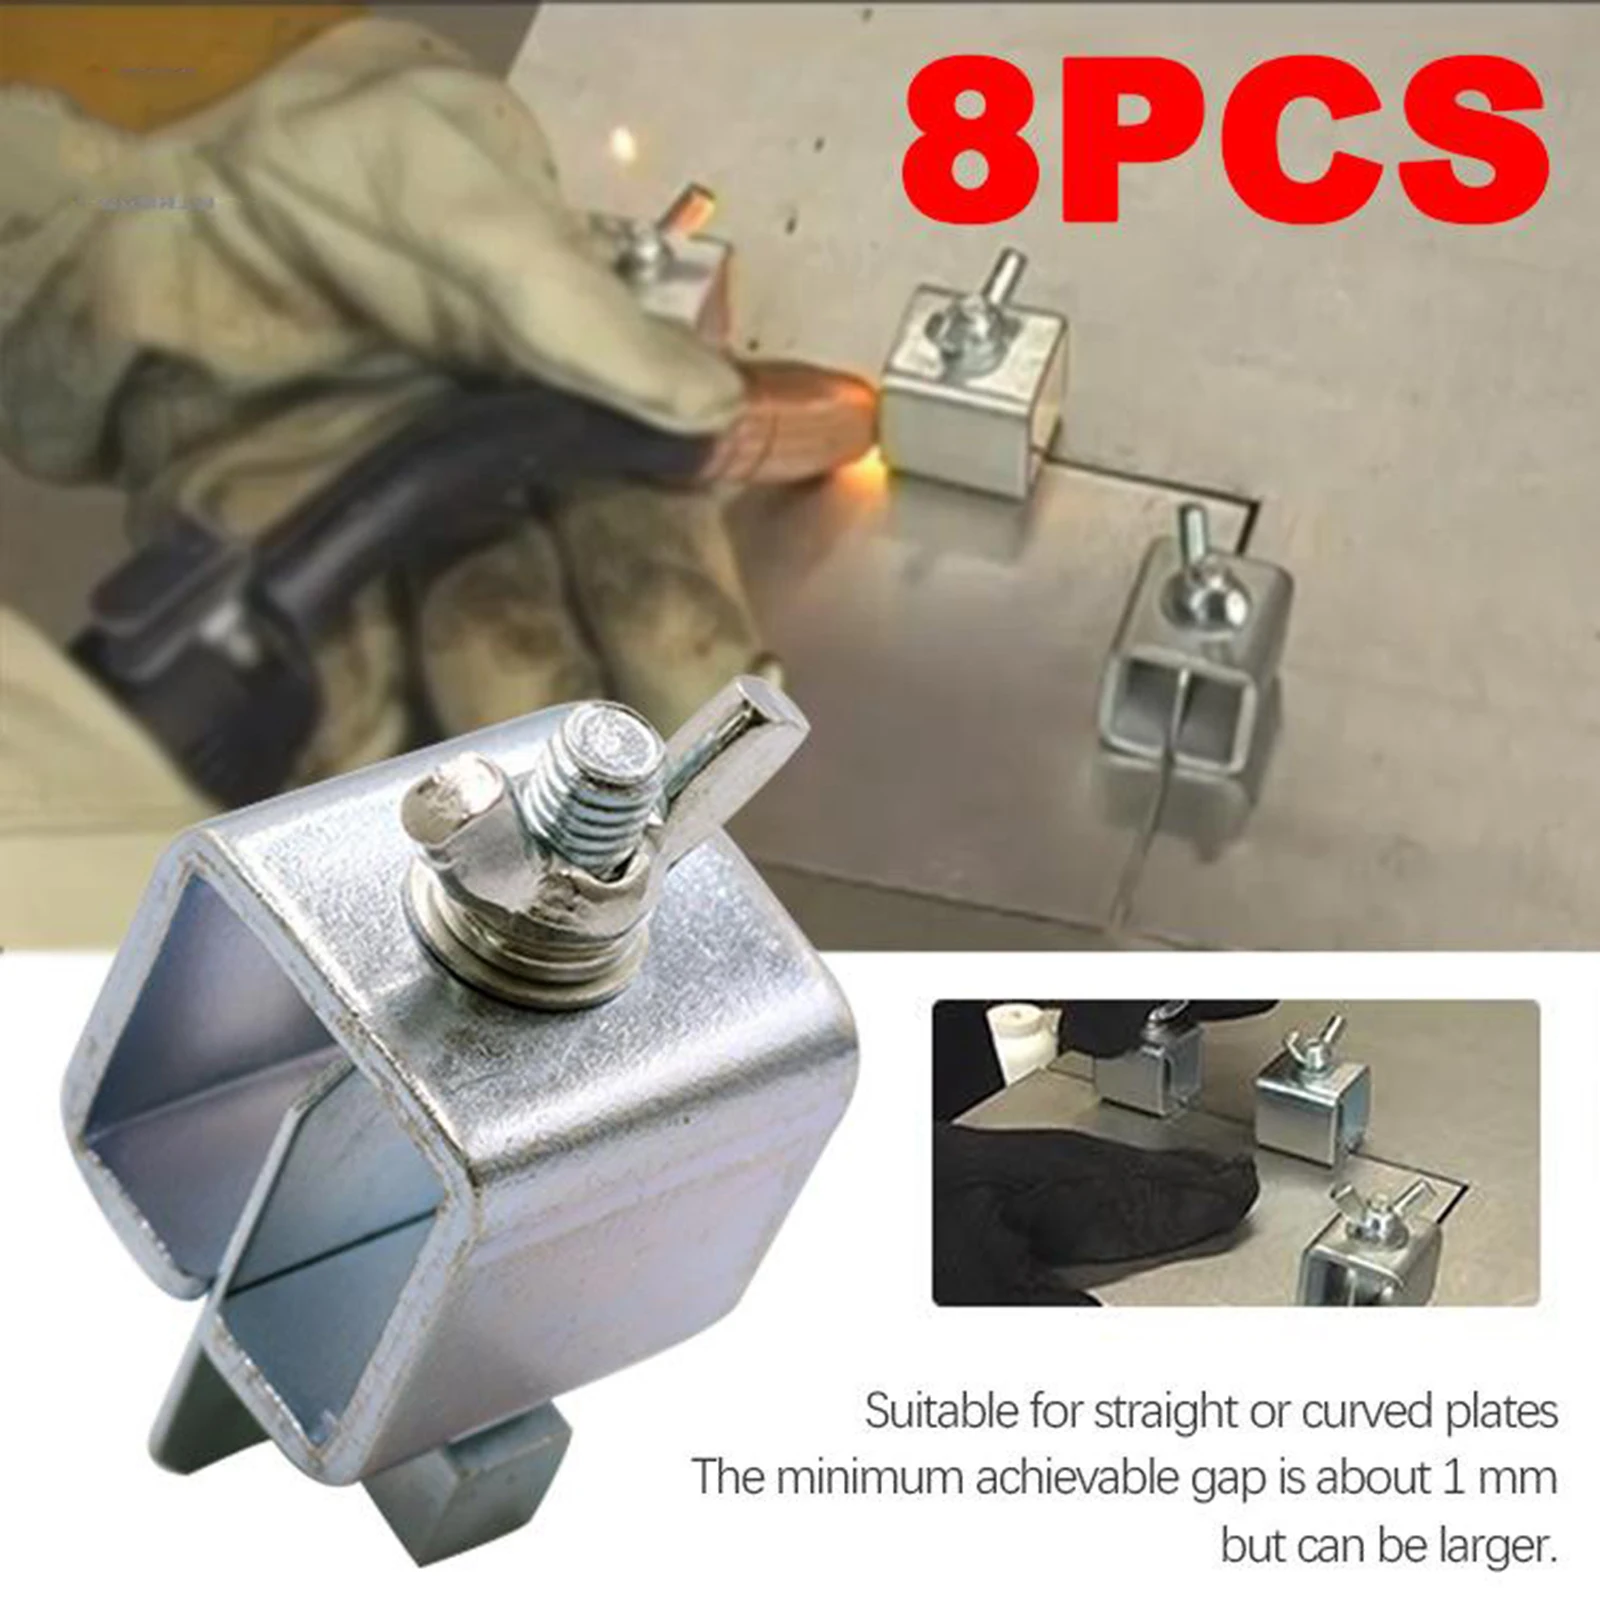 8pcs Welding Butterfly Clamps Holder Butt Weld Clamps Welding Positioner Fixture for Welding Clamps Tools Set